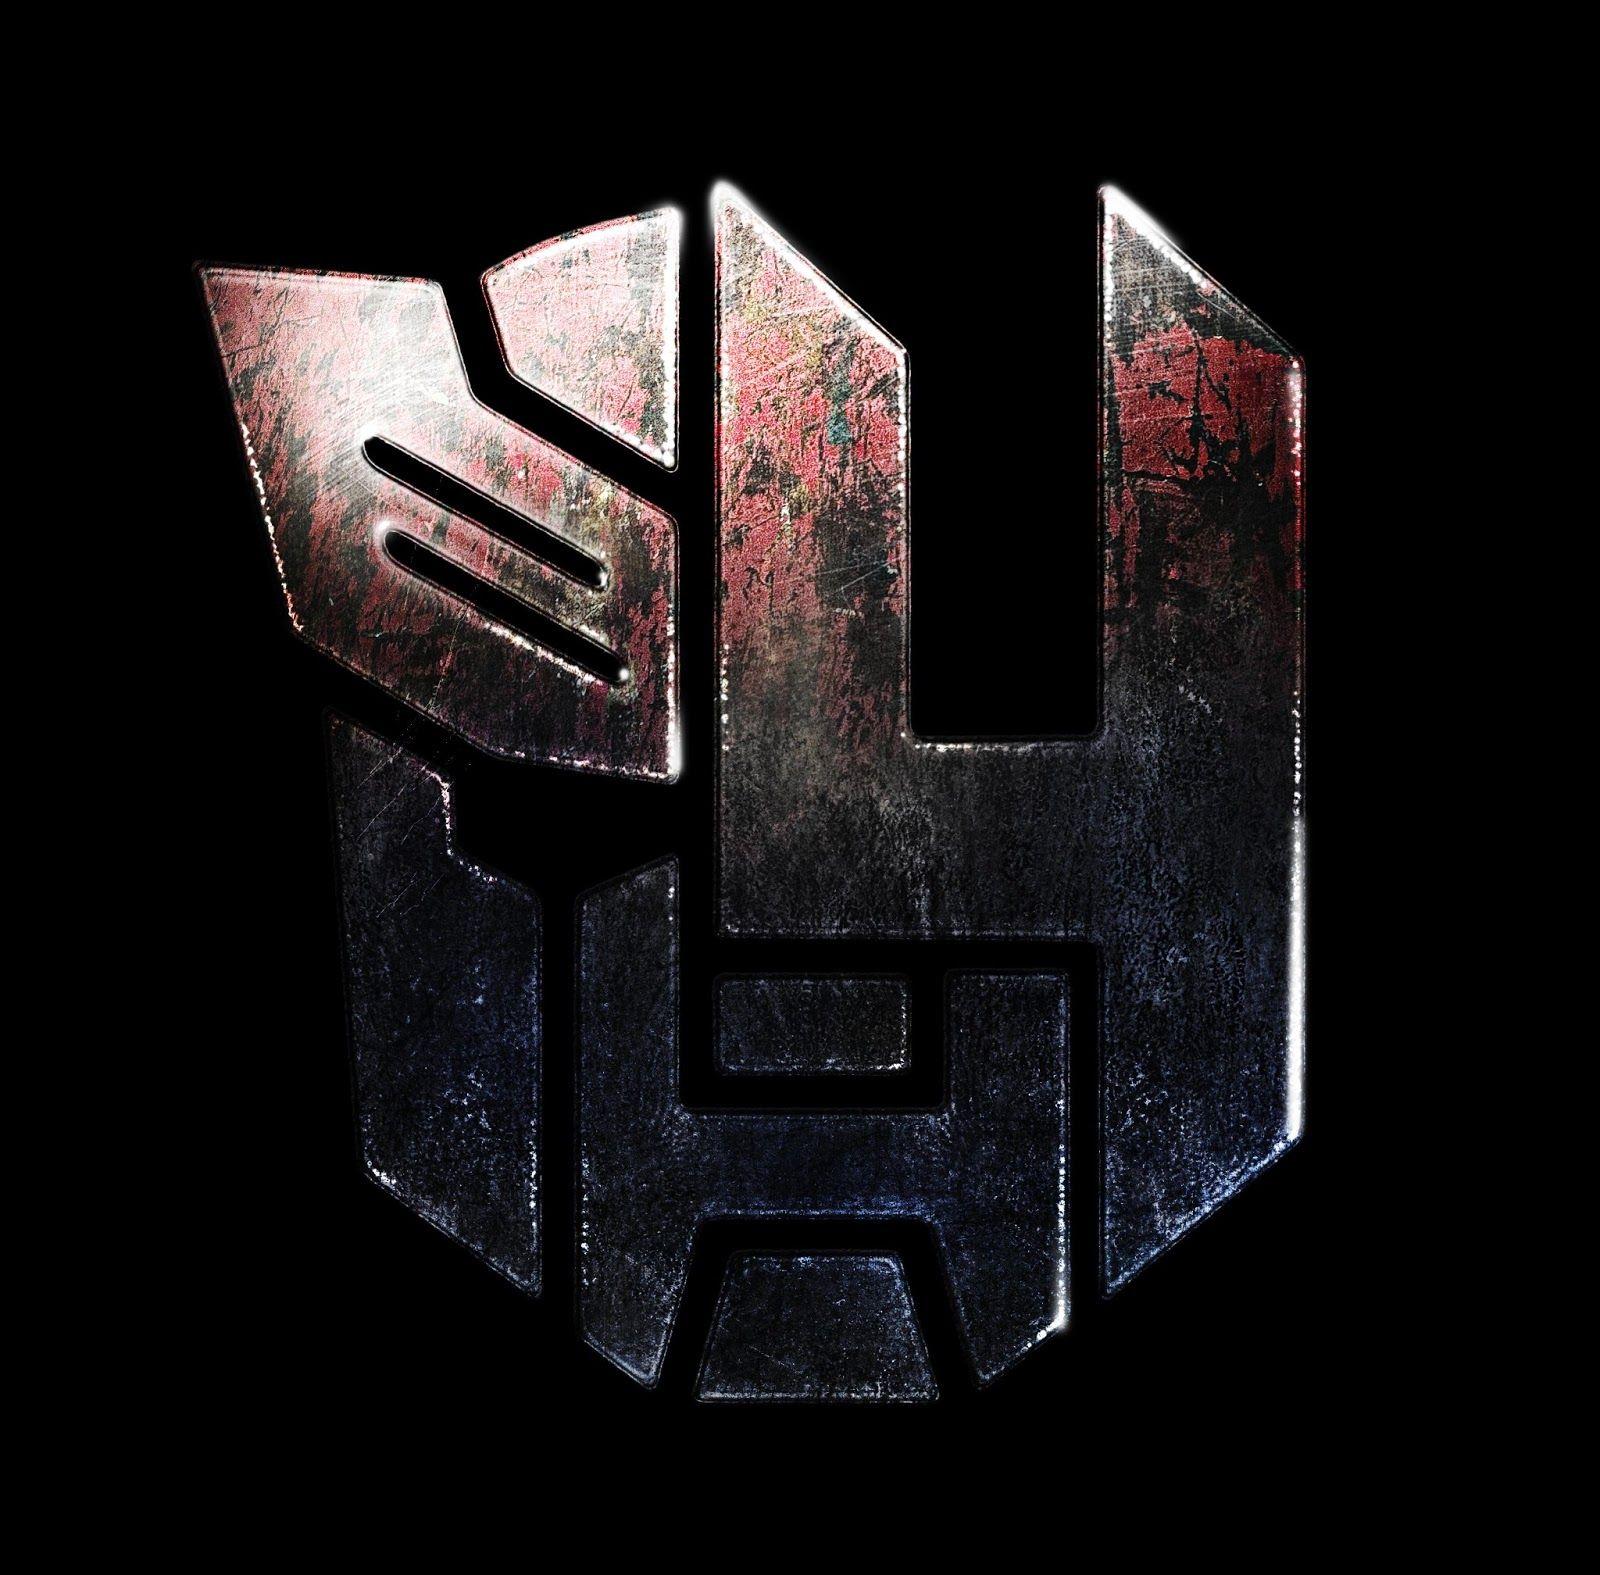 Transformers 4 Autobot Logo - Transformers Live Action Movie Blog (TFLAMB): Names of Two New